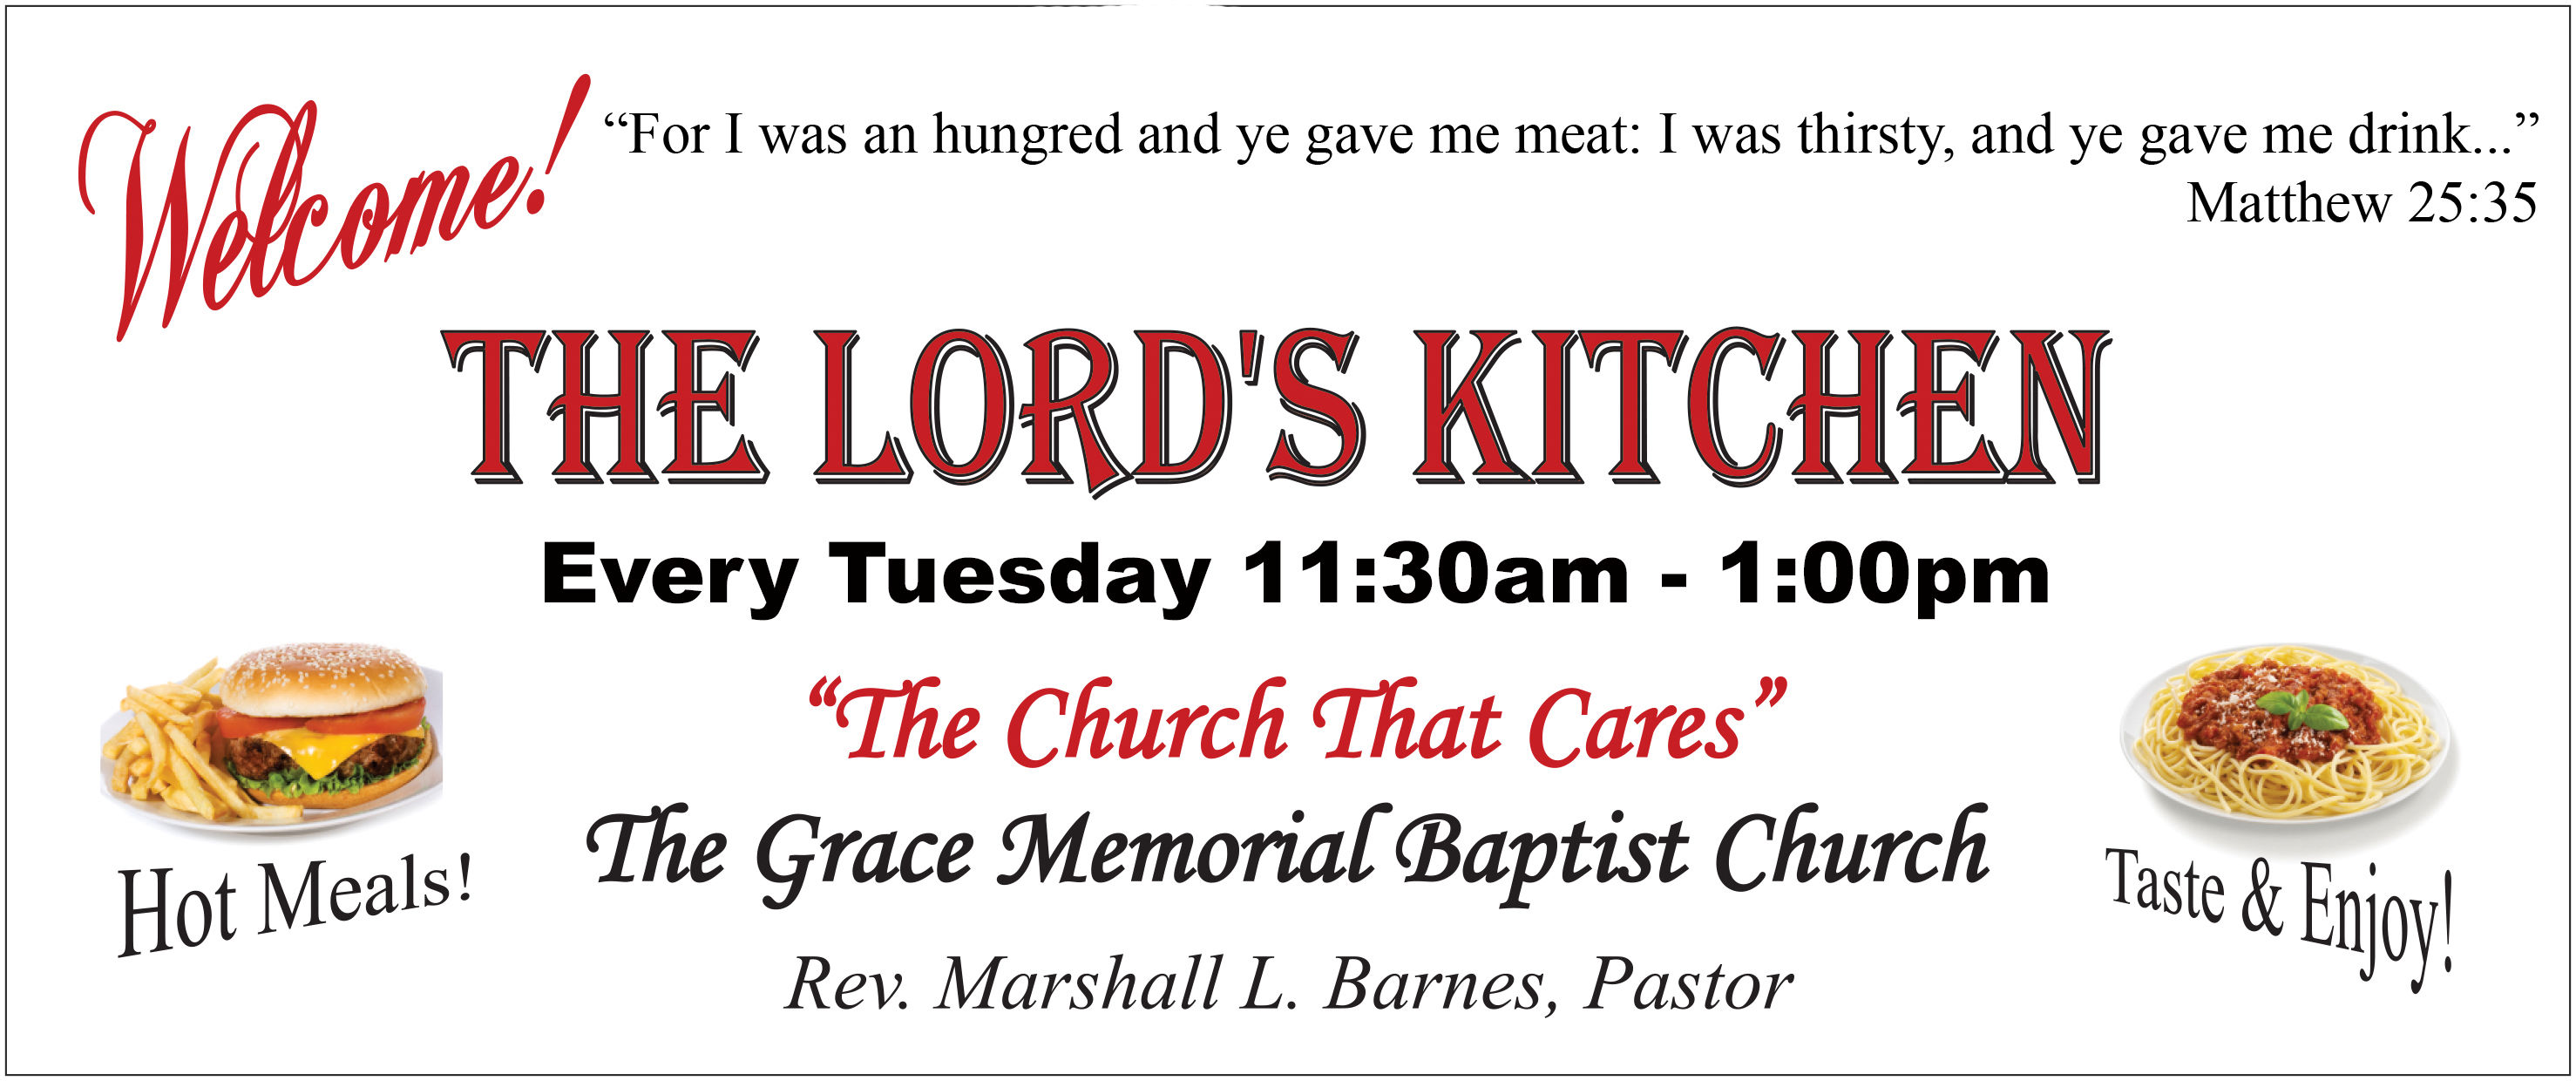 The Lord's Kitchen